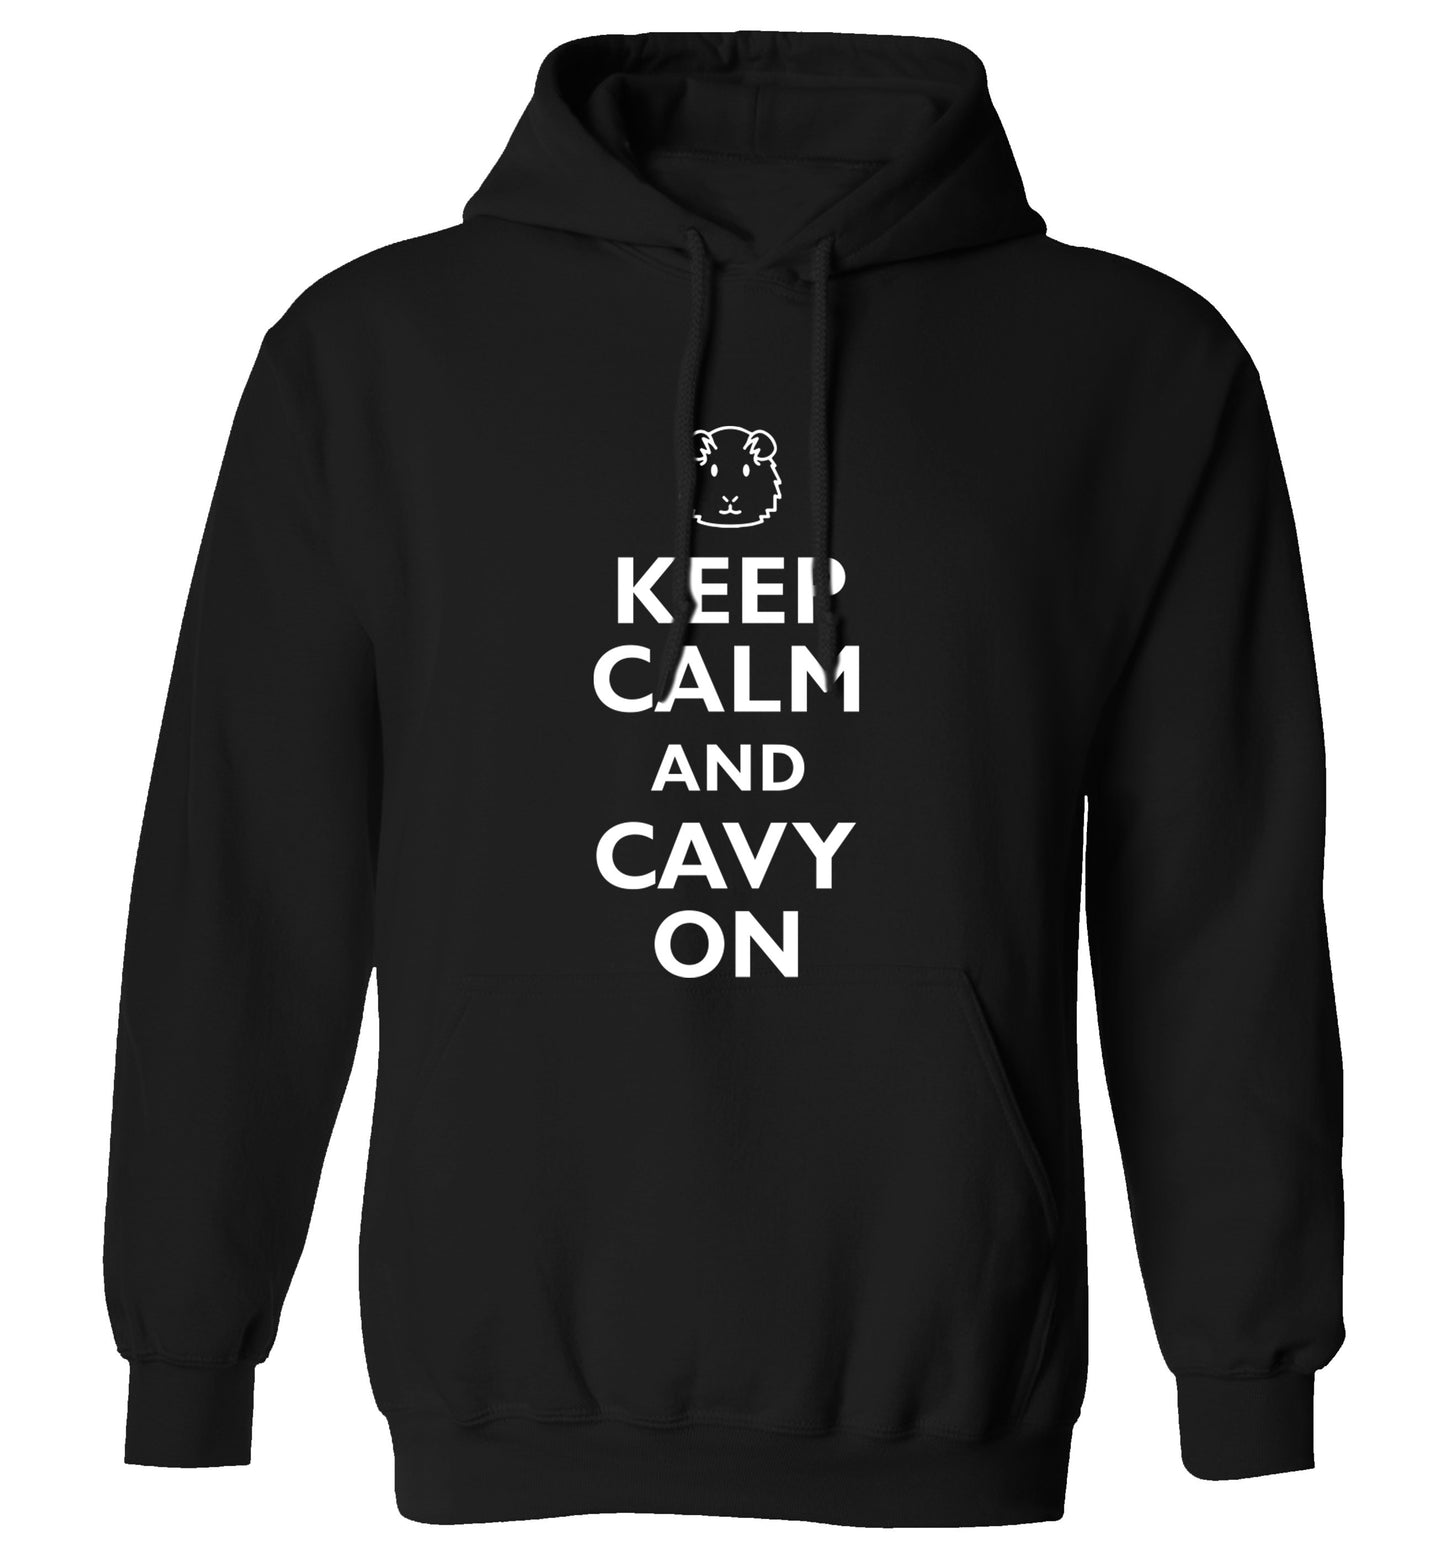 Keep calm and cavvy on adults unisex black hoodie 2XL